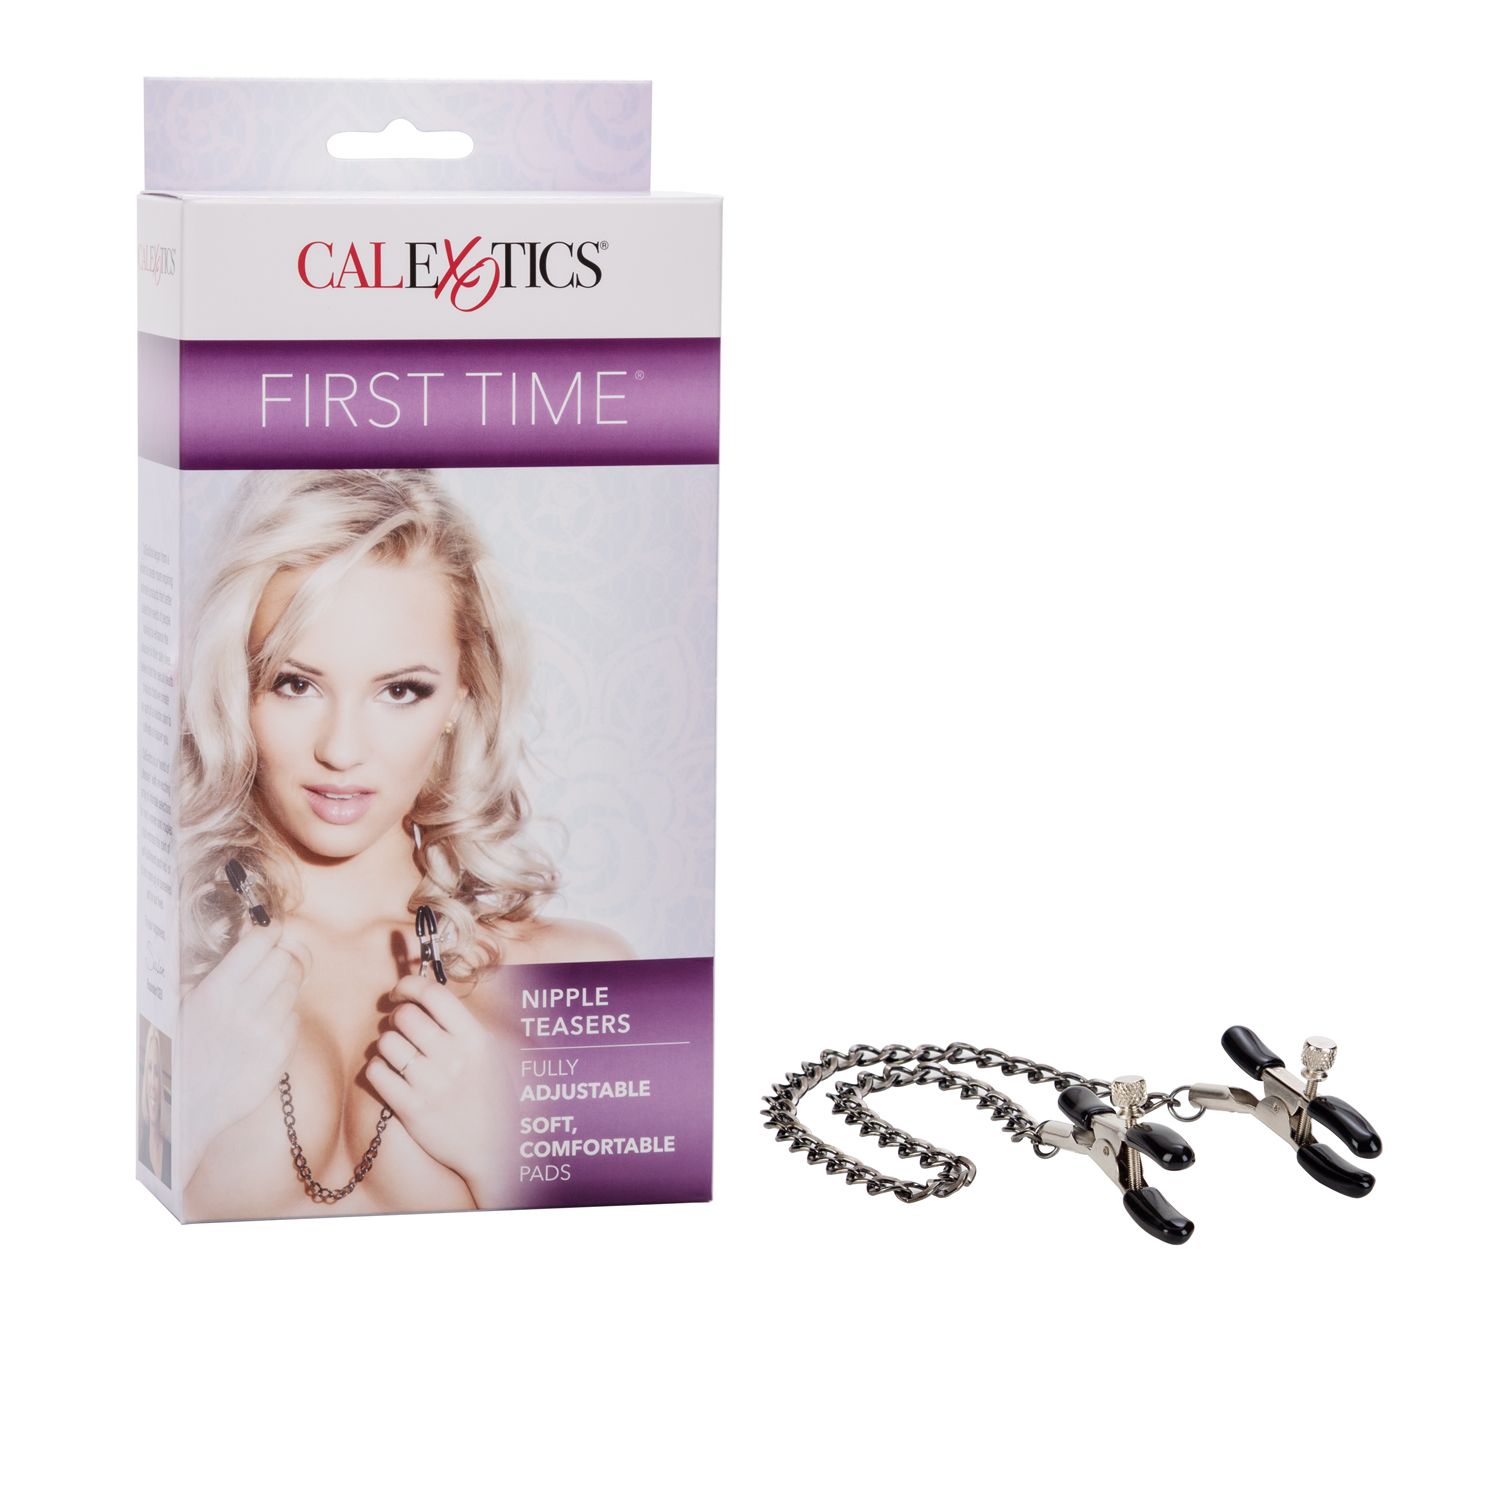 CalExotics First Time Fetish Nipple Teasers Adjustable Clamps